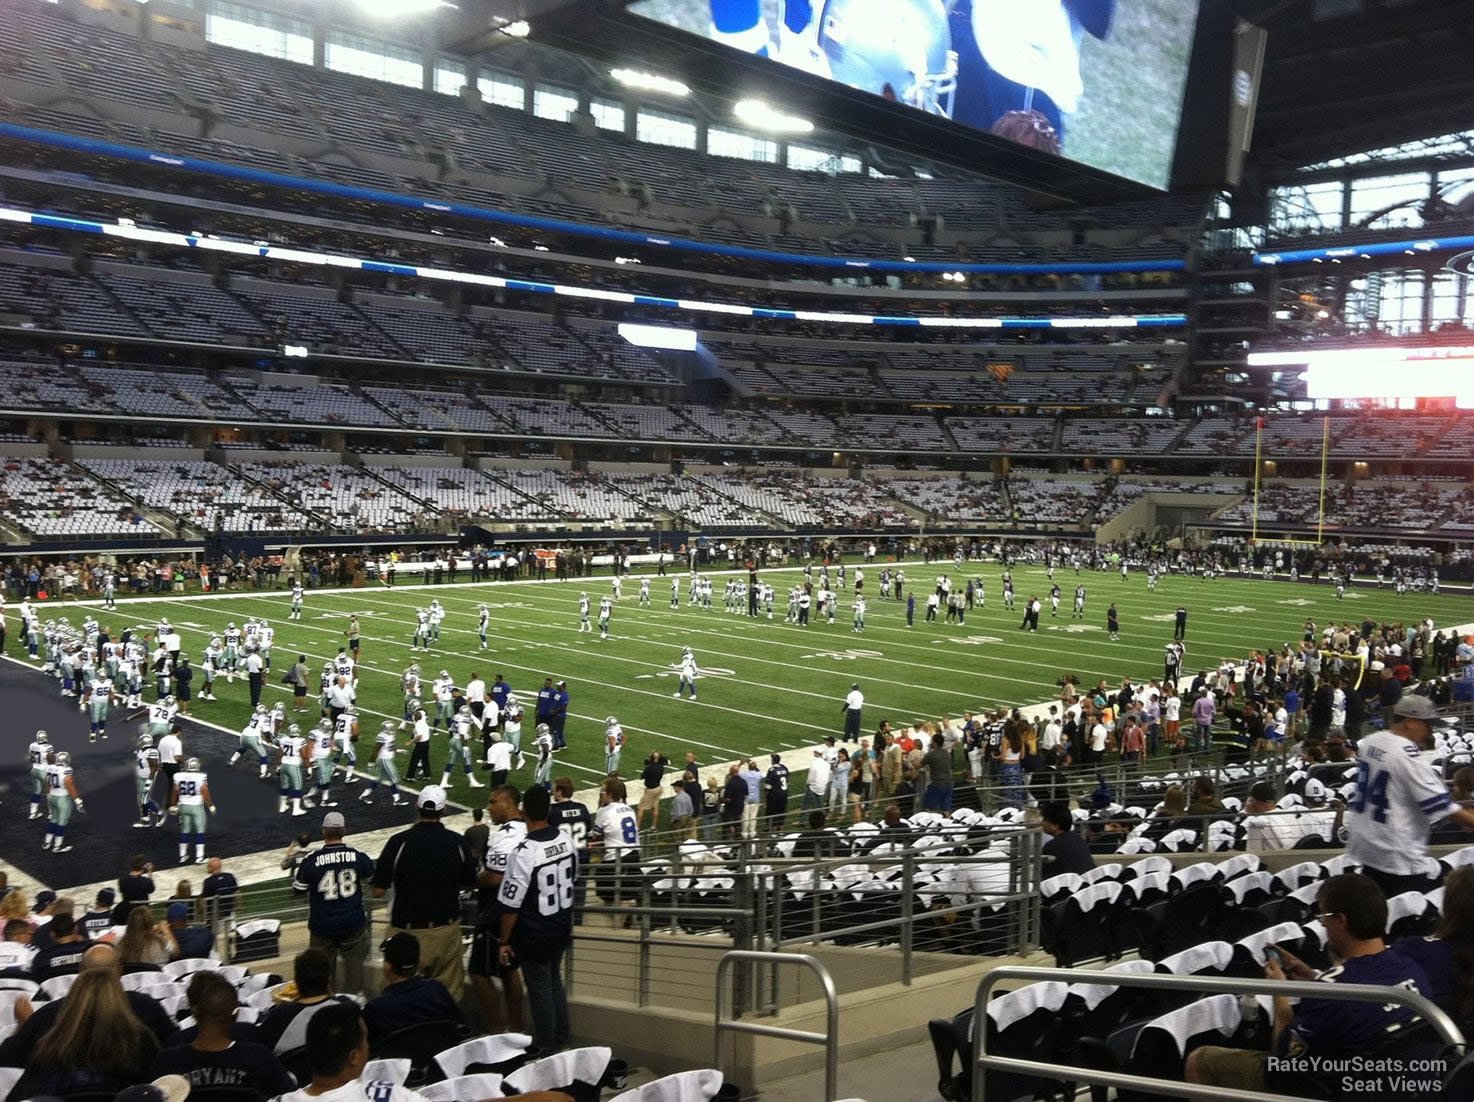 section 119, row 20 seat view  for football - at&t stadium (cowboys stadium)